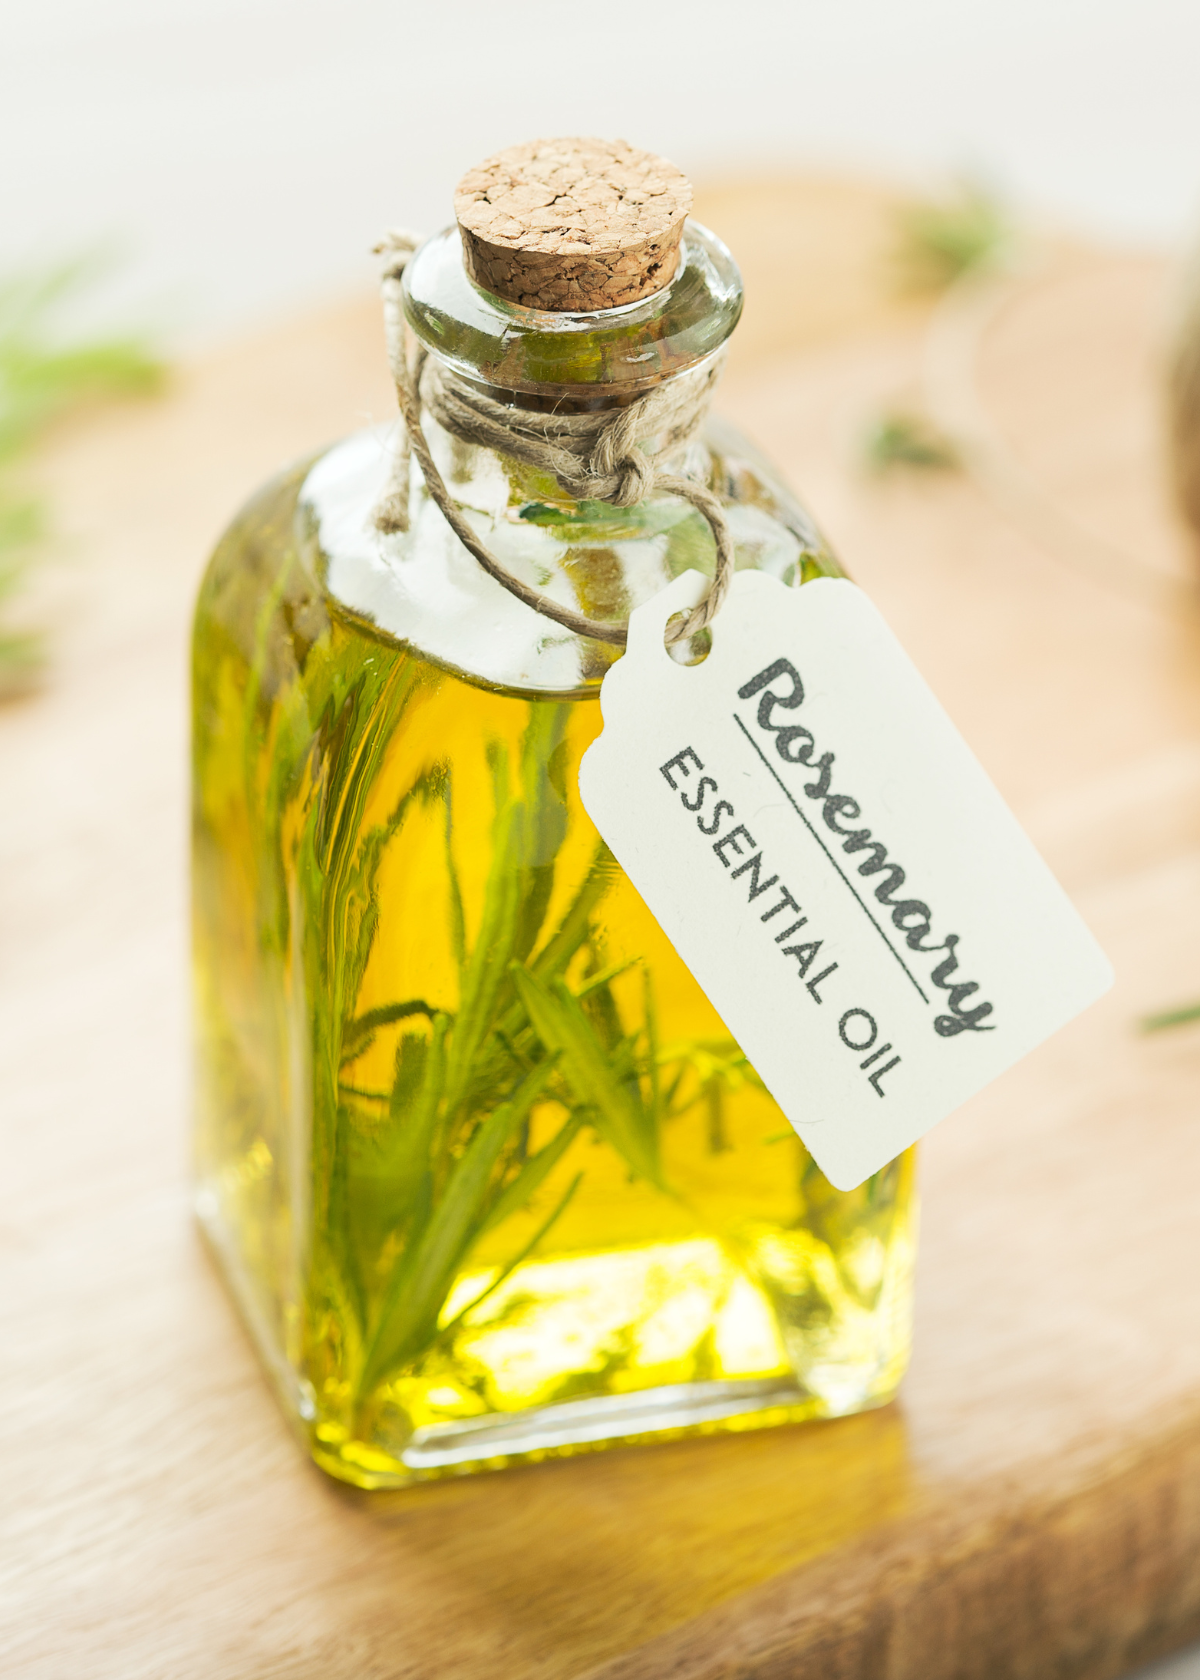 5 Best Rosemary Oils for Eyebrows: Time to Get Strong Eyebrows